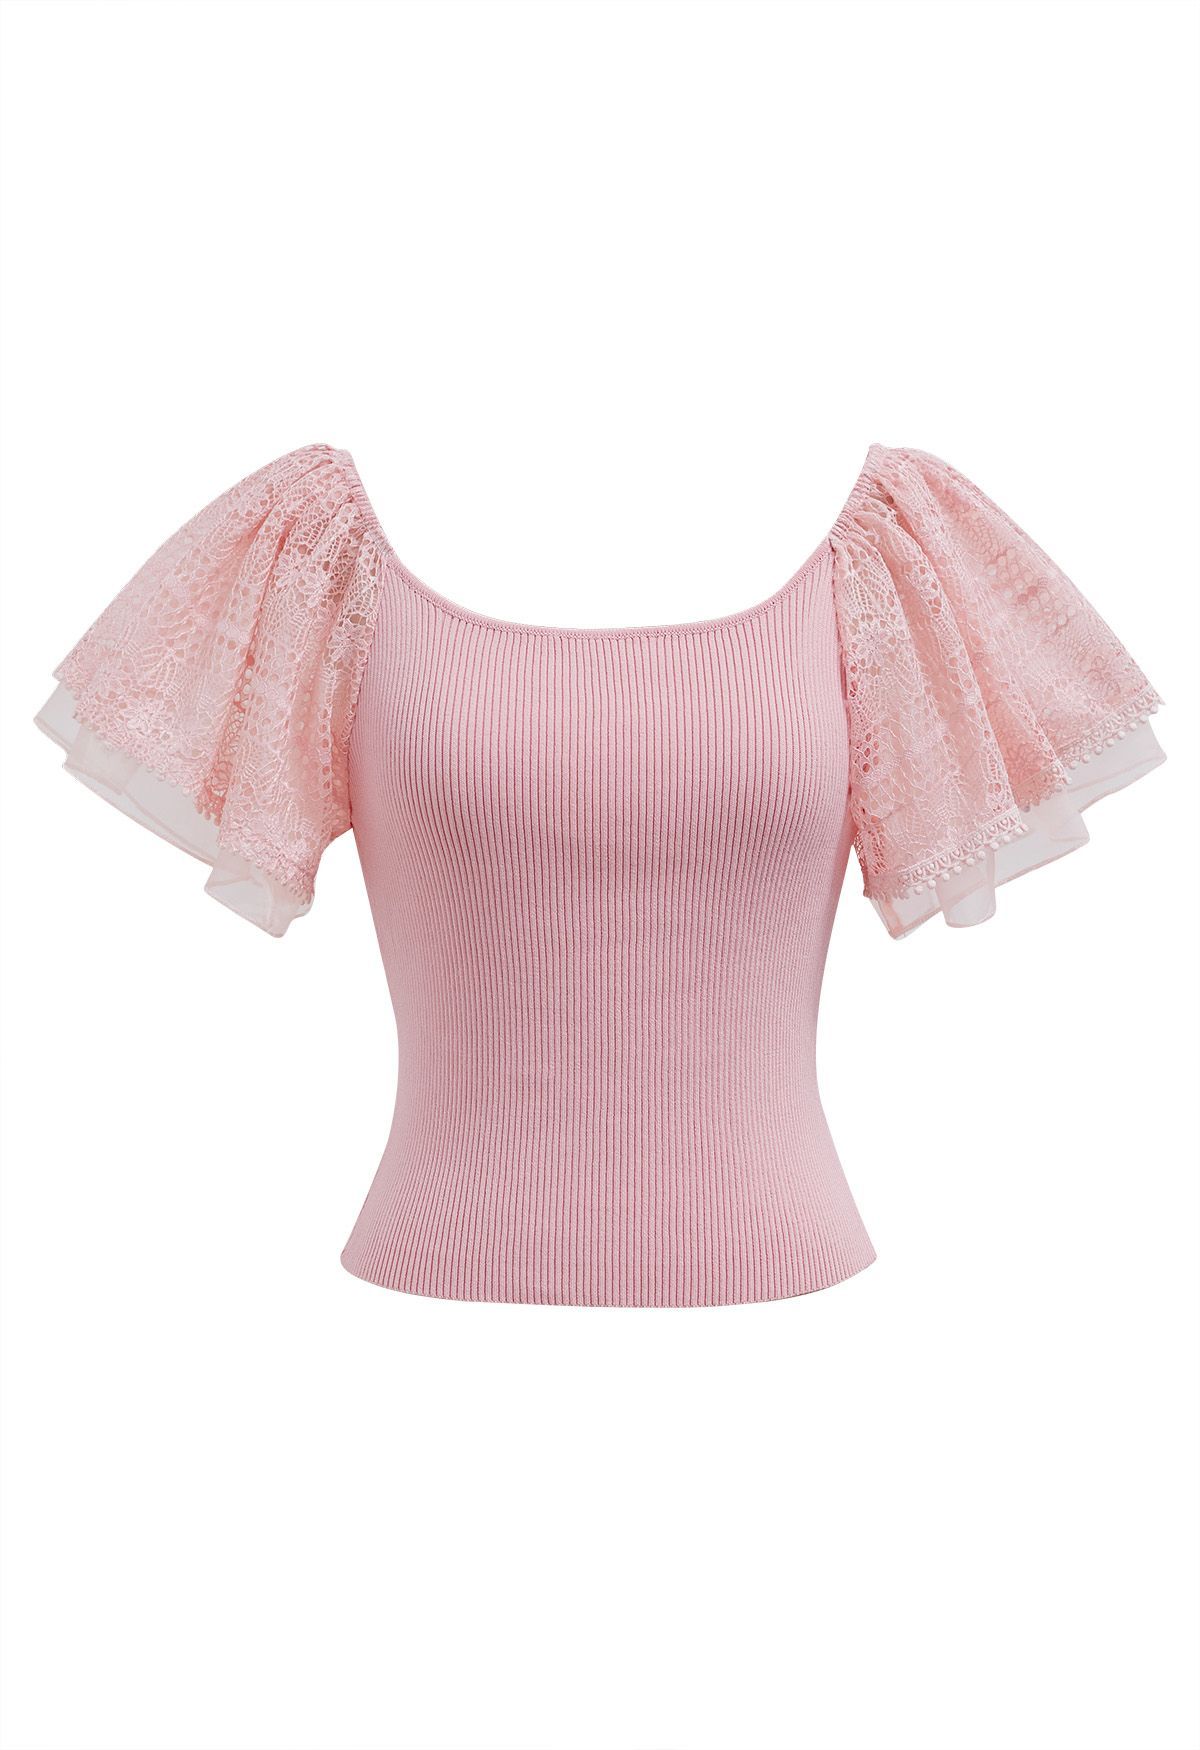 Cutwork Lace Flutter Sleeves Spliced Knit Top in Pink | Chicwish